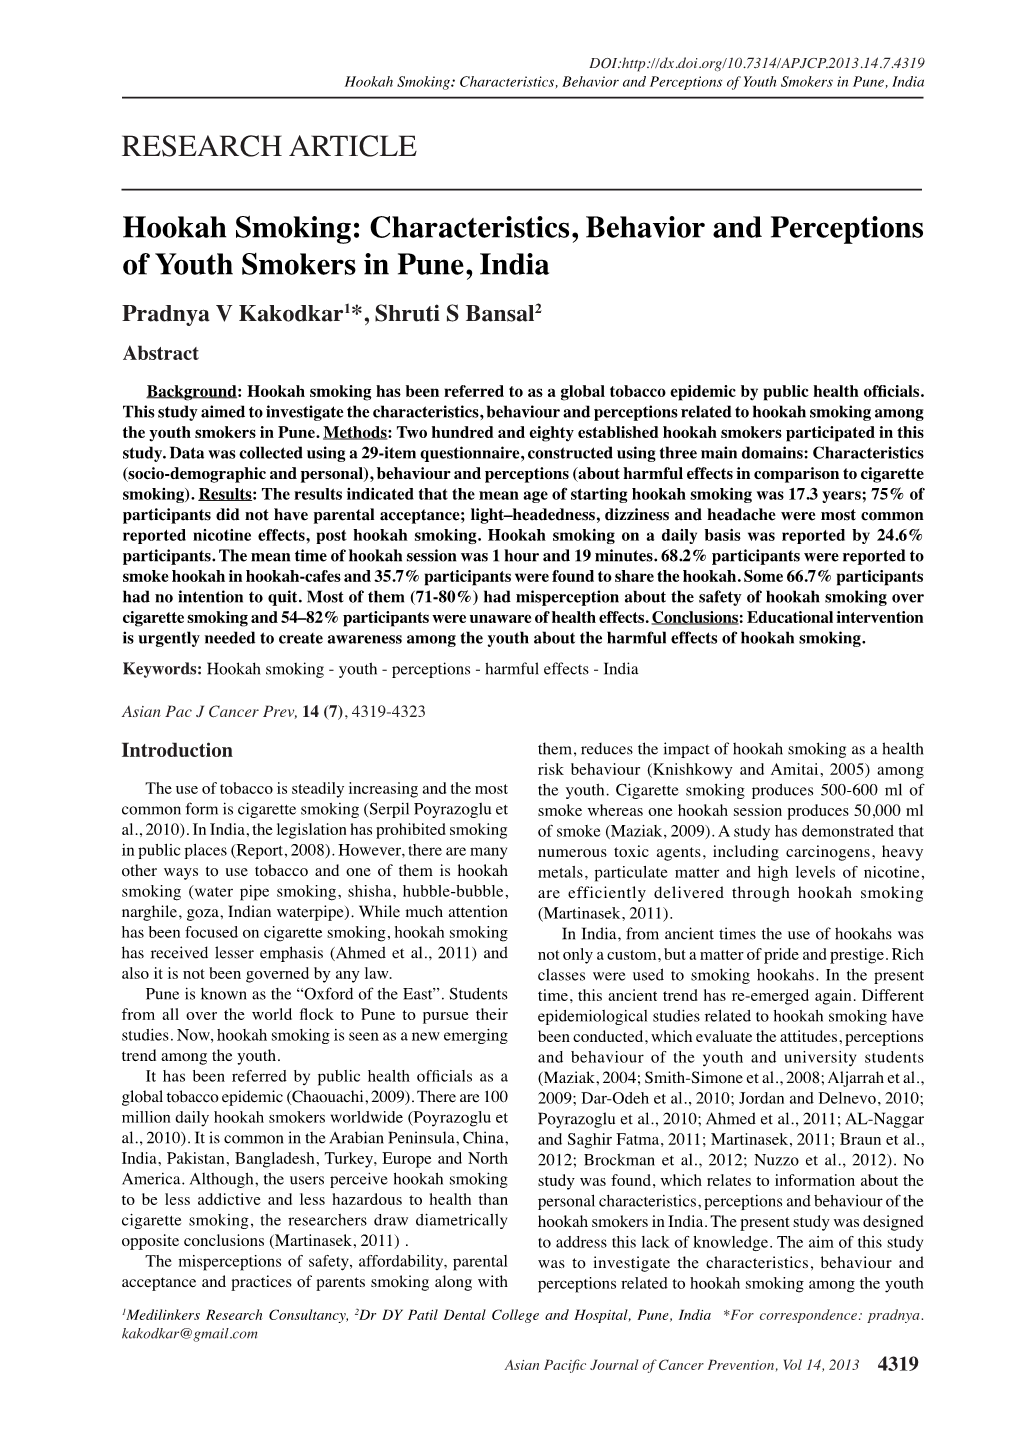 Hookah Smoking: Characteristics, Behavior and Perceptions of Youth Smokers in Pune, India